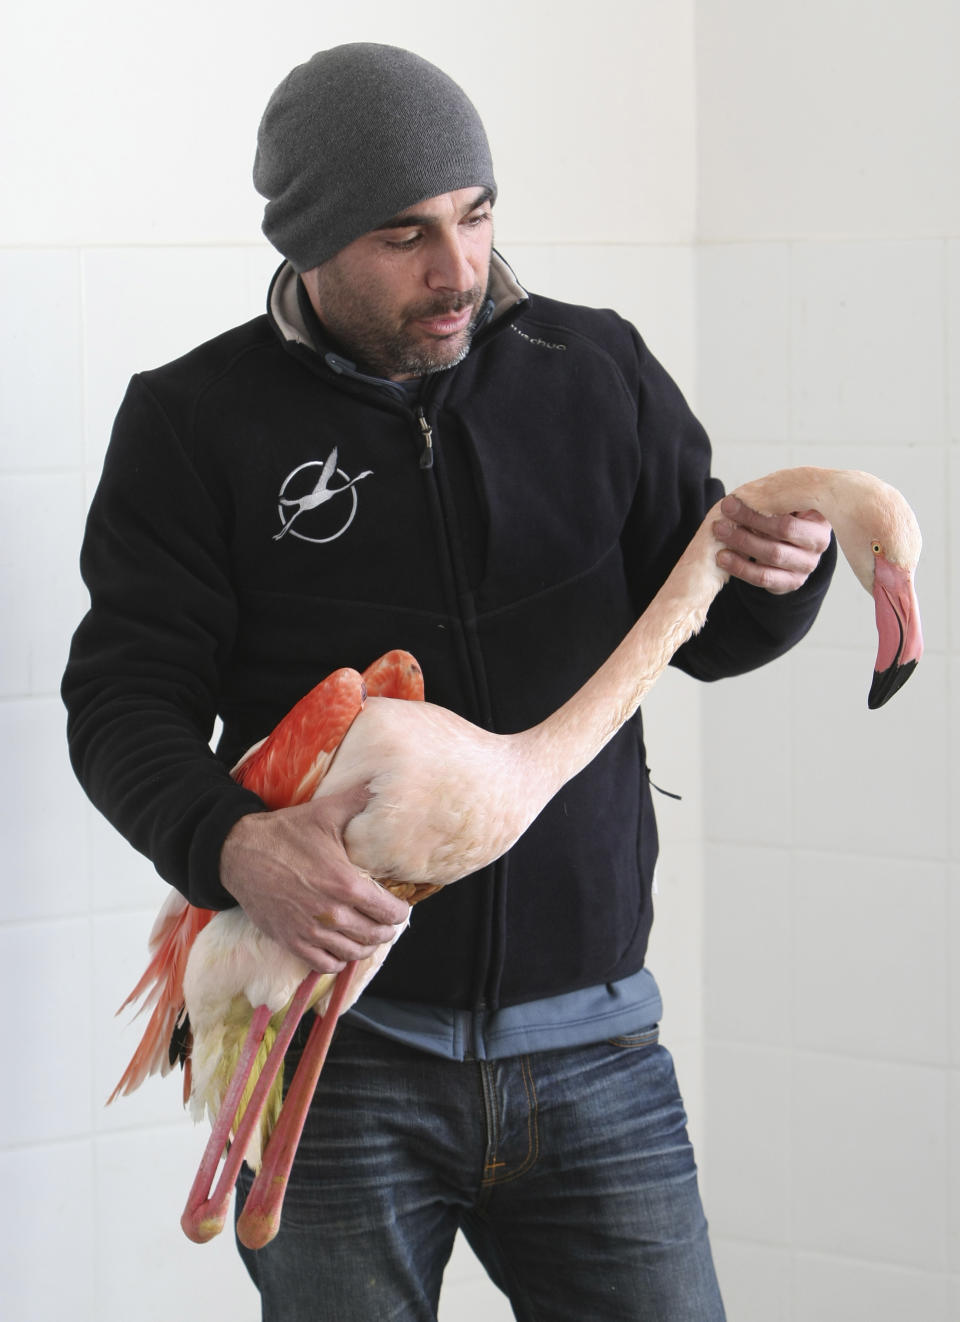 French ornithologist Frederic Lamouroux tends a pink flamingo of the Camargue region at the Pont du Gau ornithological park near Saintes Maries de la Mer, southern France, Thursday, Feb. 9, 2012. France's Bird Protection League says the cold snap has left some pink flamingoes dead and called on members intervene to save flamingoes suffering from the cold. (AP Photo/Claude Paris)